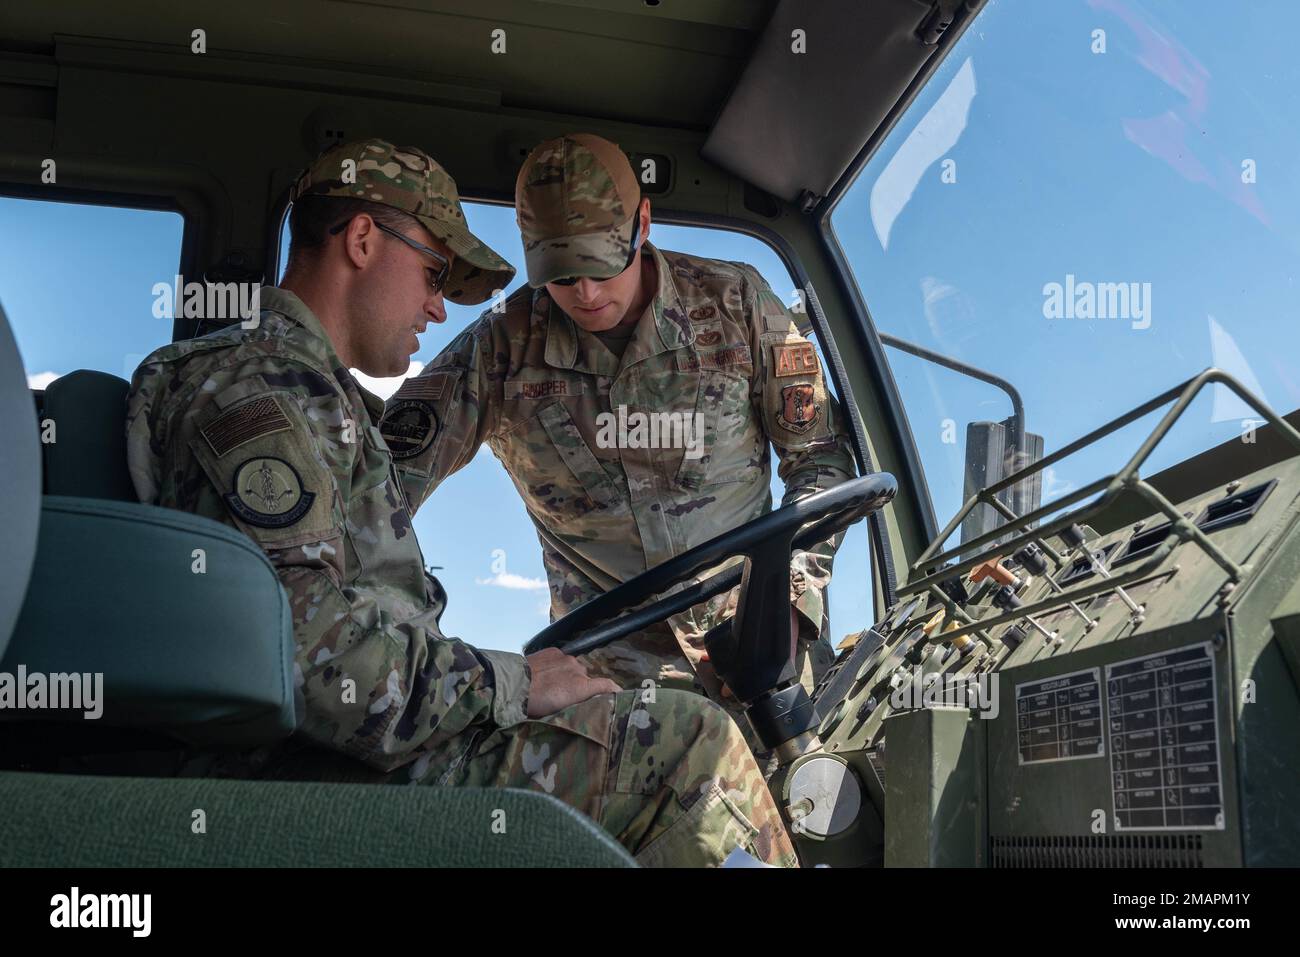 U.S. Air Force Master Sgt. Mike Mitrou and Staff Sgt. Nicholas Groeper, both Aircrew Flight Equipment specialist with the 182nd Operations Support Squadron, Illinois Air National Guard, discuss vehicle operations inside the M1078 cargo truck during a scheduled stop on the convoy to Volk Field Combat Readiness Training Center, Camp Douglas, Wisconsin, June 2, 2022. The 182nd OSS and 169th Airlift Squadron participated in a multi-capable Airman training exercise at Volk Field CRTC from June 2 to June 4, 2022. Stock Photo